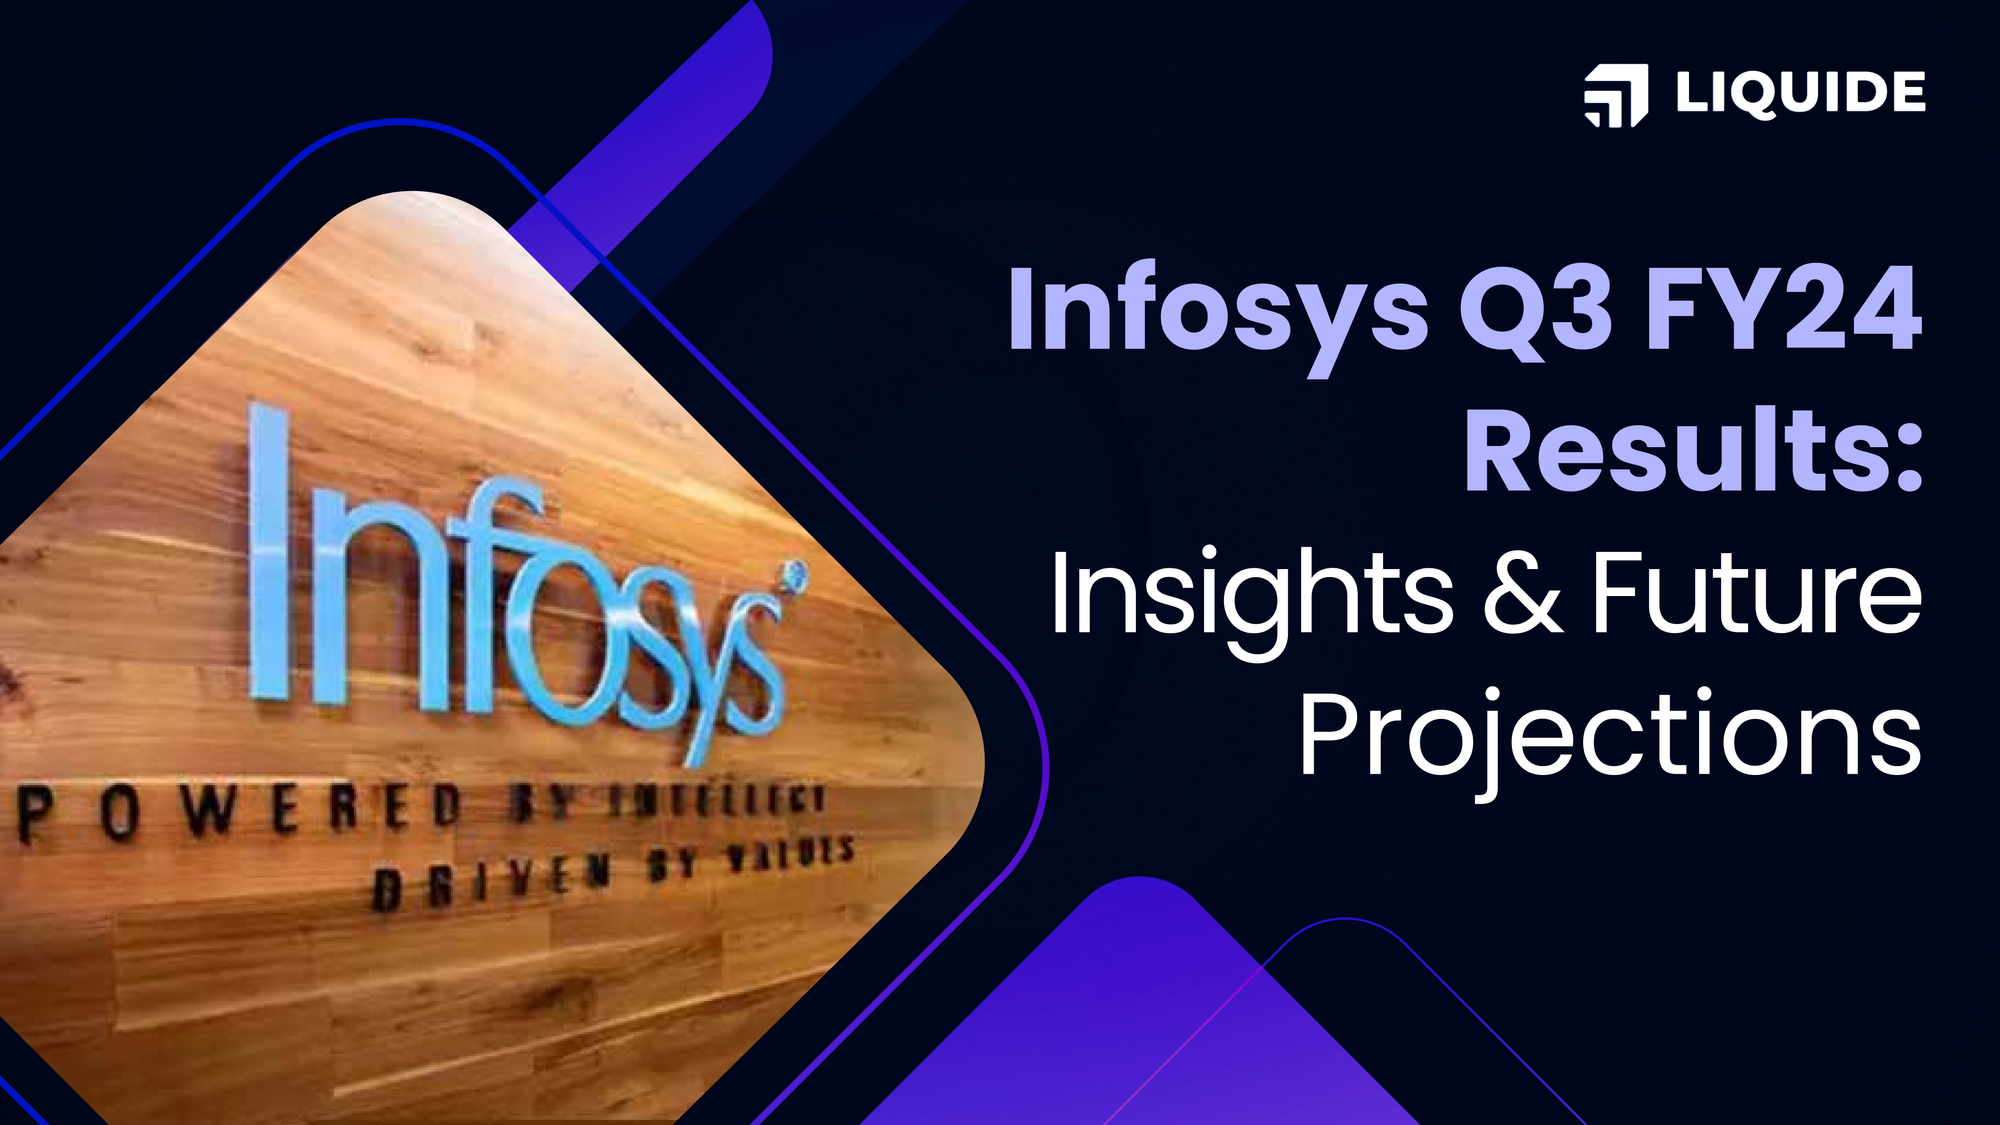 Infosys Q3 FY24 Results: Insights & Future Projections